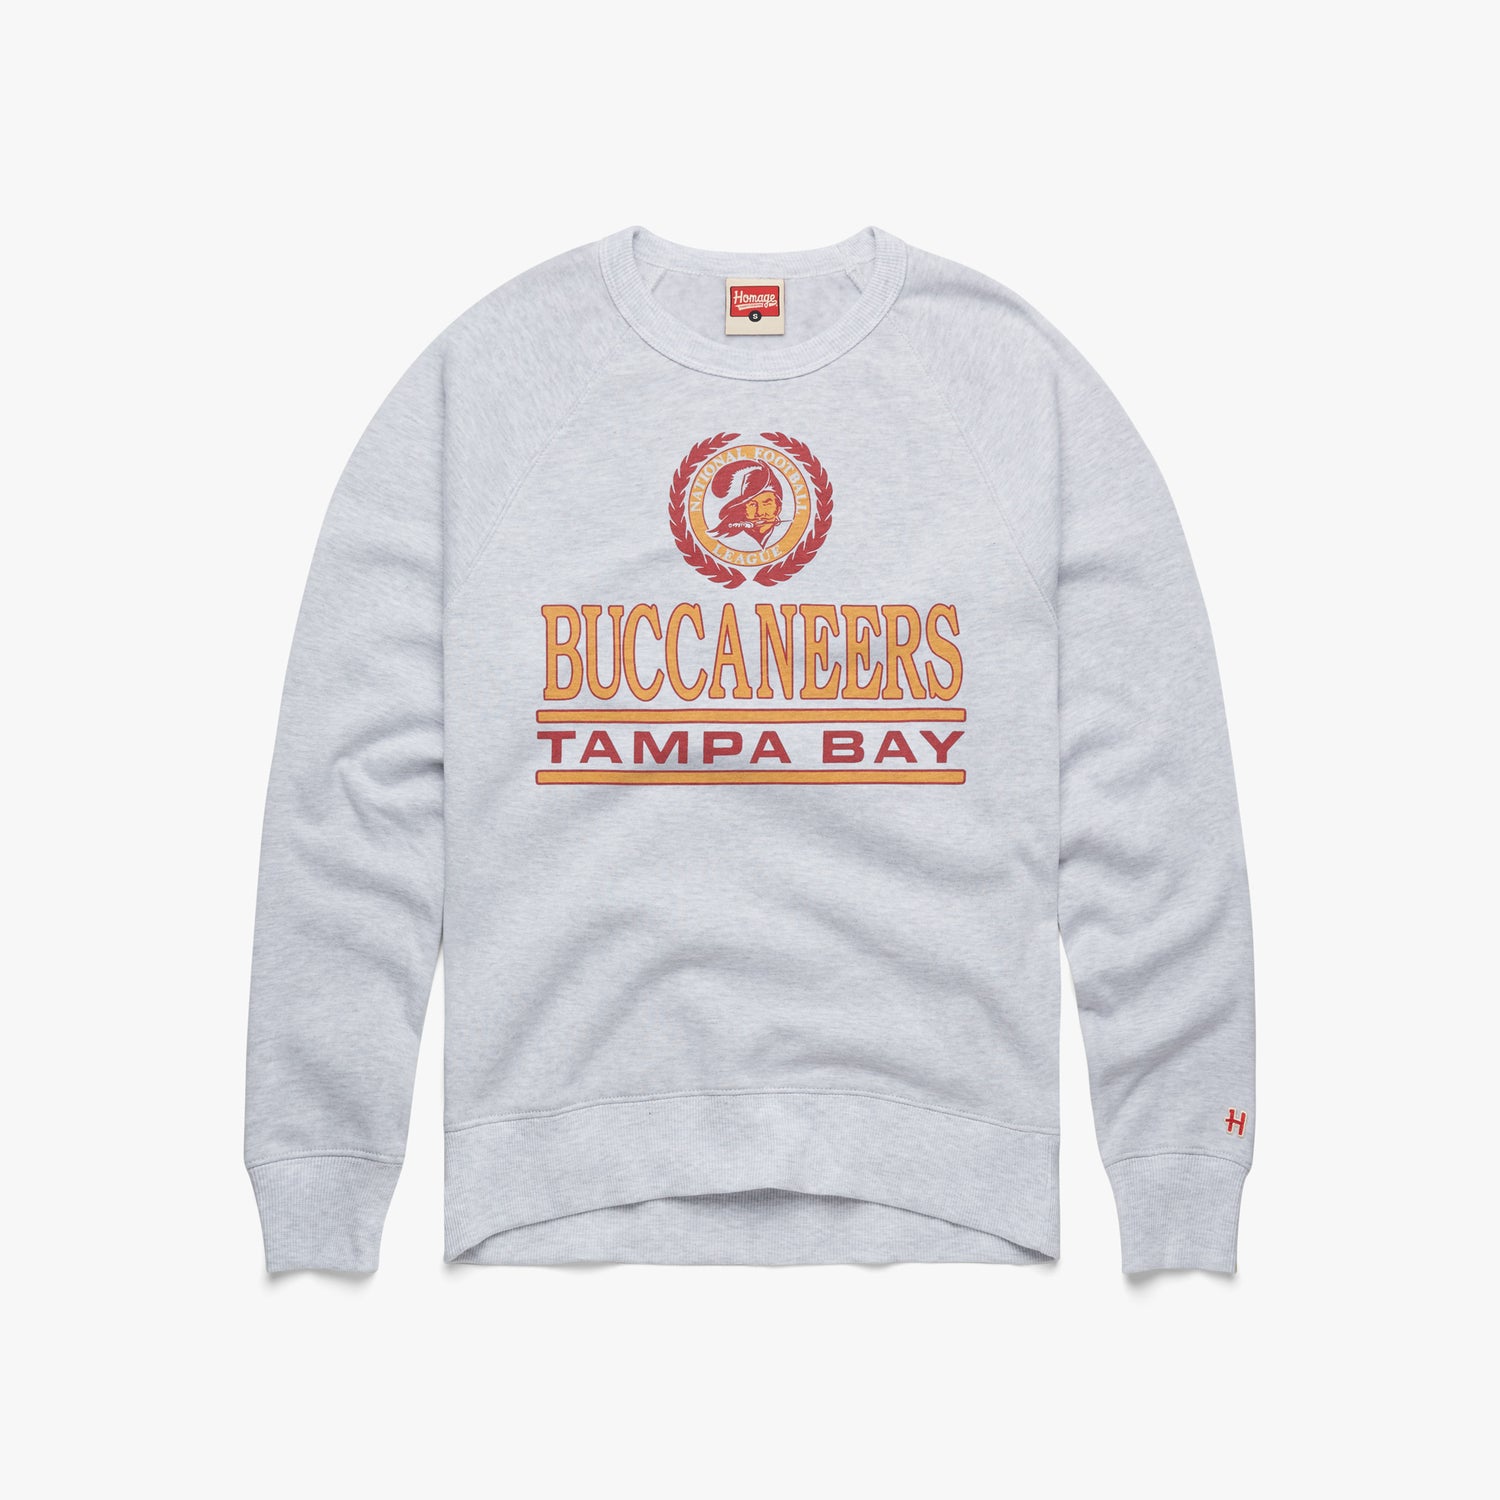 Tampa Bay Buccaneers Crest Crewneck from Homage. | Officially Licensed Vintage NFL Apparel from Homage Pro Shop.